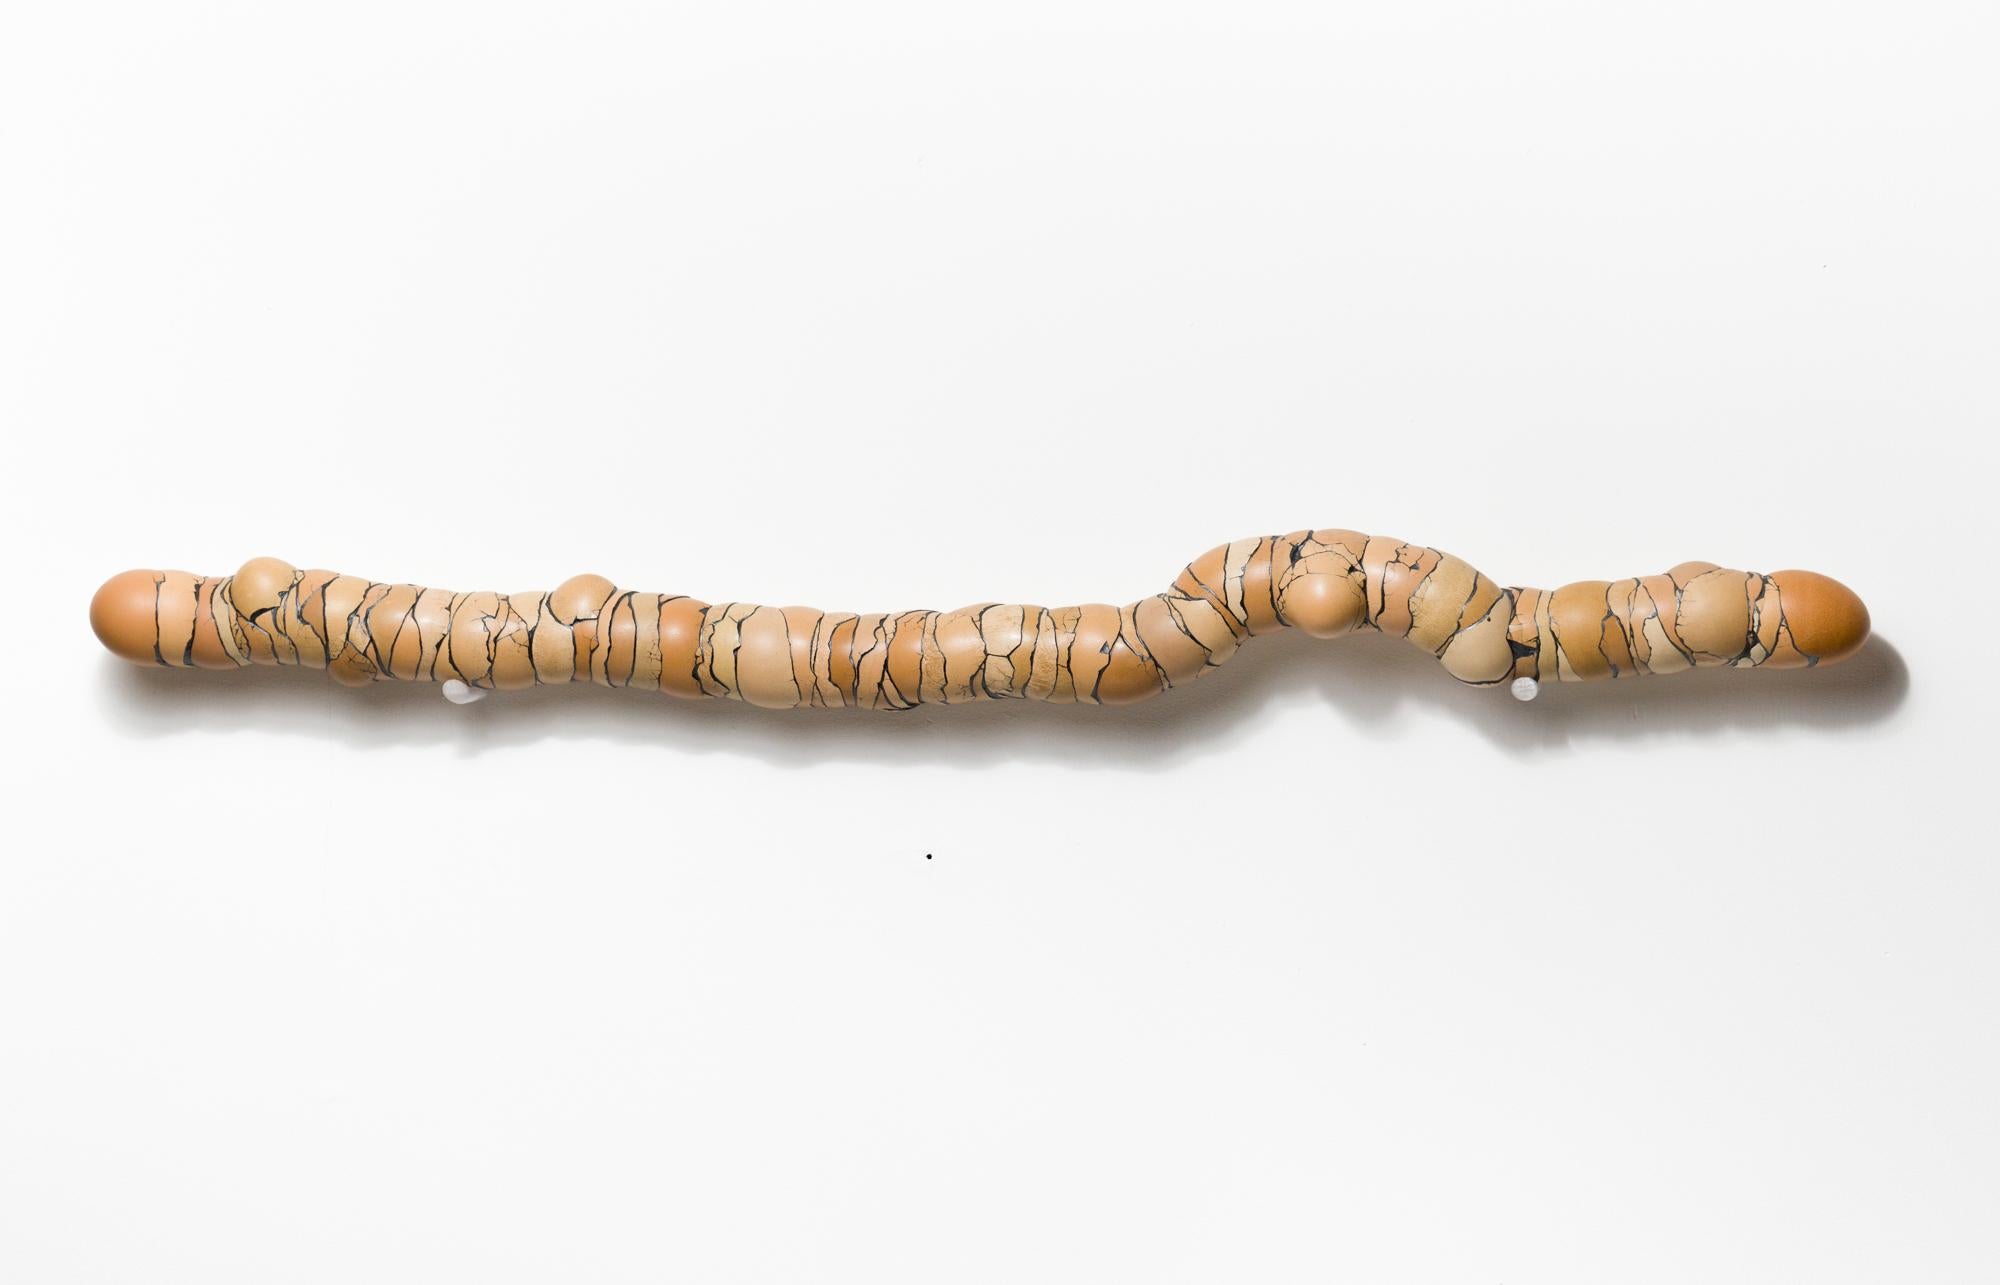 This piece titled "Walking Stick" is an original piece by Kate VanVliet and is made from eggshells, mica,  PVA. This piece measures 4”h x 32”w x 3”d and comes with 3-D printed screw covers to display sculpture horizontally on the wall.

Kate